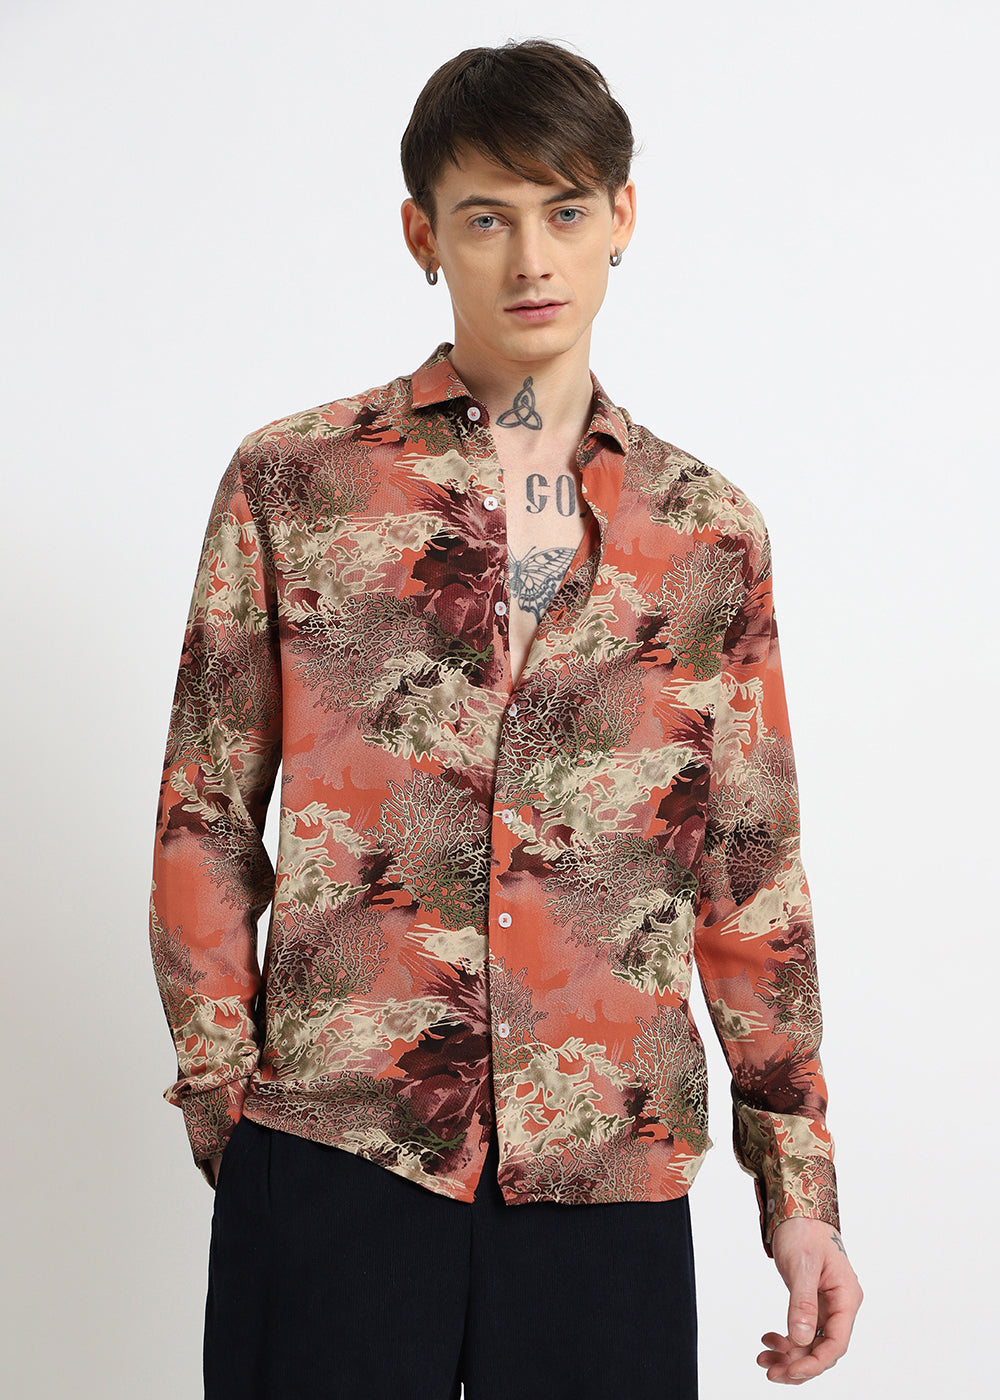 Coral Oasis Orange Feather shirt